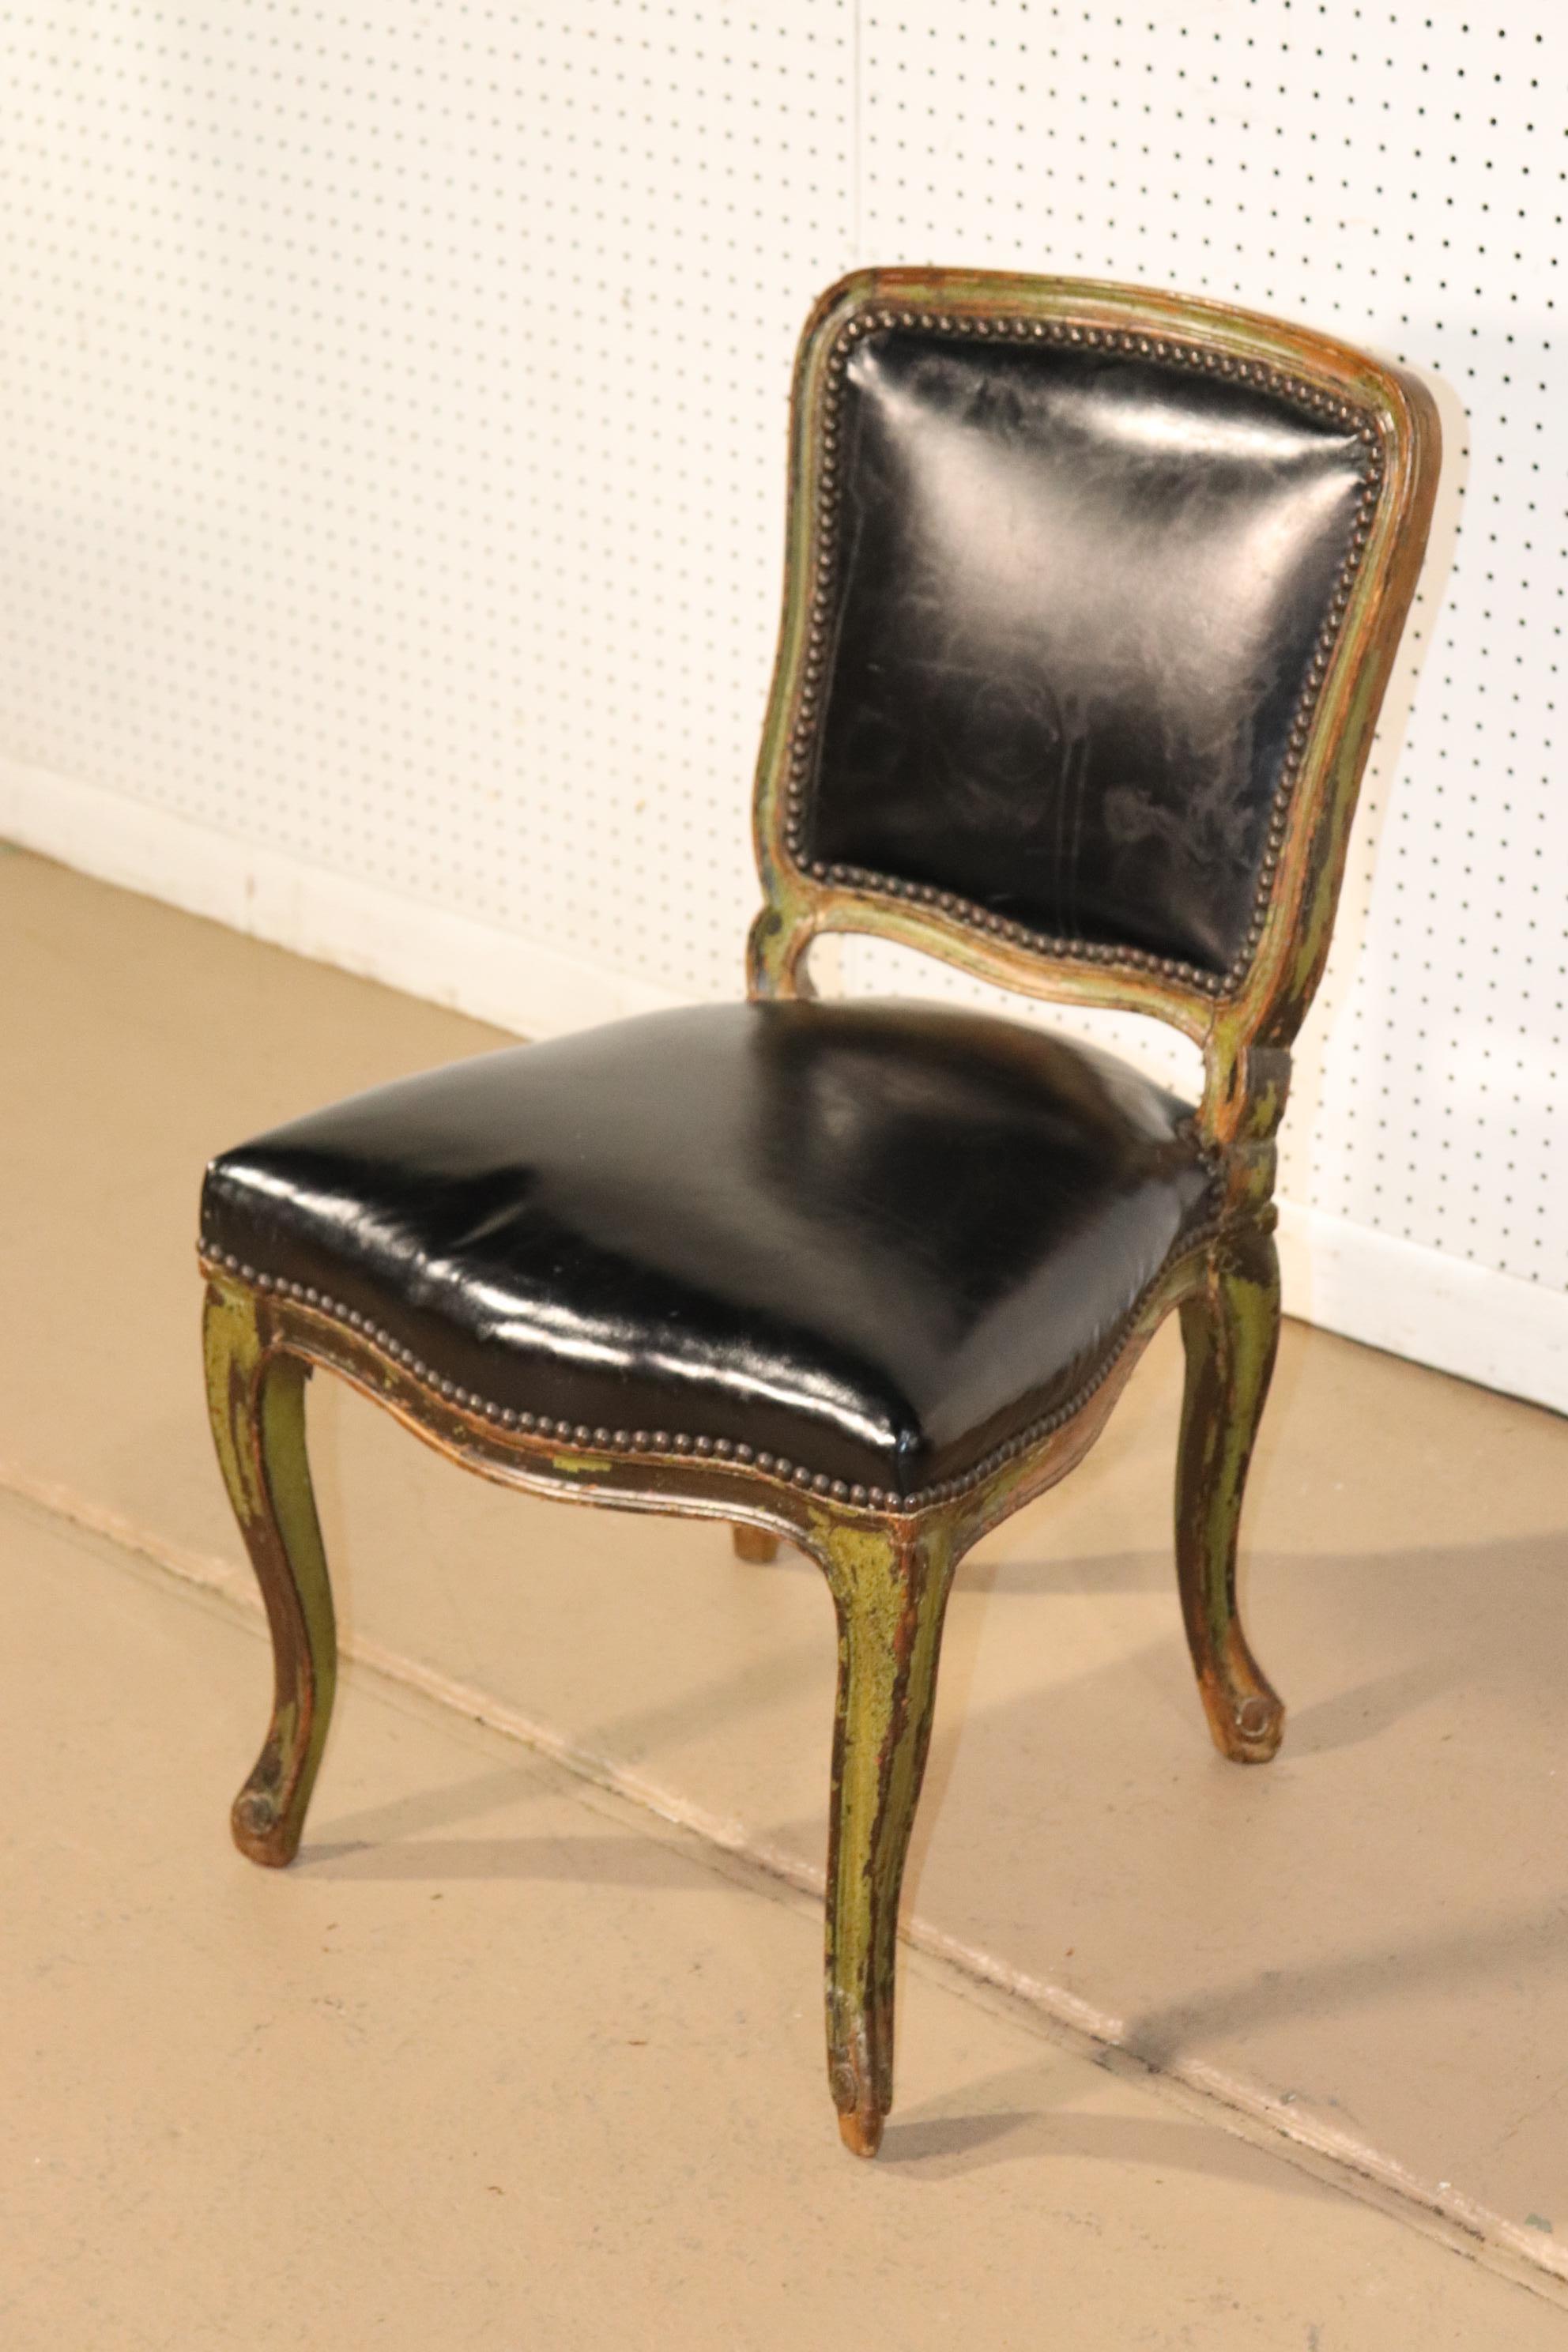 This is a beautiful leather chair from the early 1900s. The painted frame has traces of green paint over the walnut and adds tremendous character to the chair. The black leather is in good condition. The chair measures 33 tall x 19 wide x 21 deep